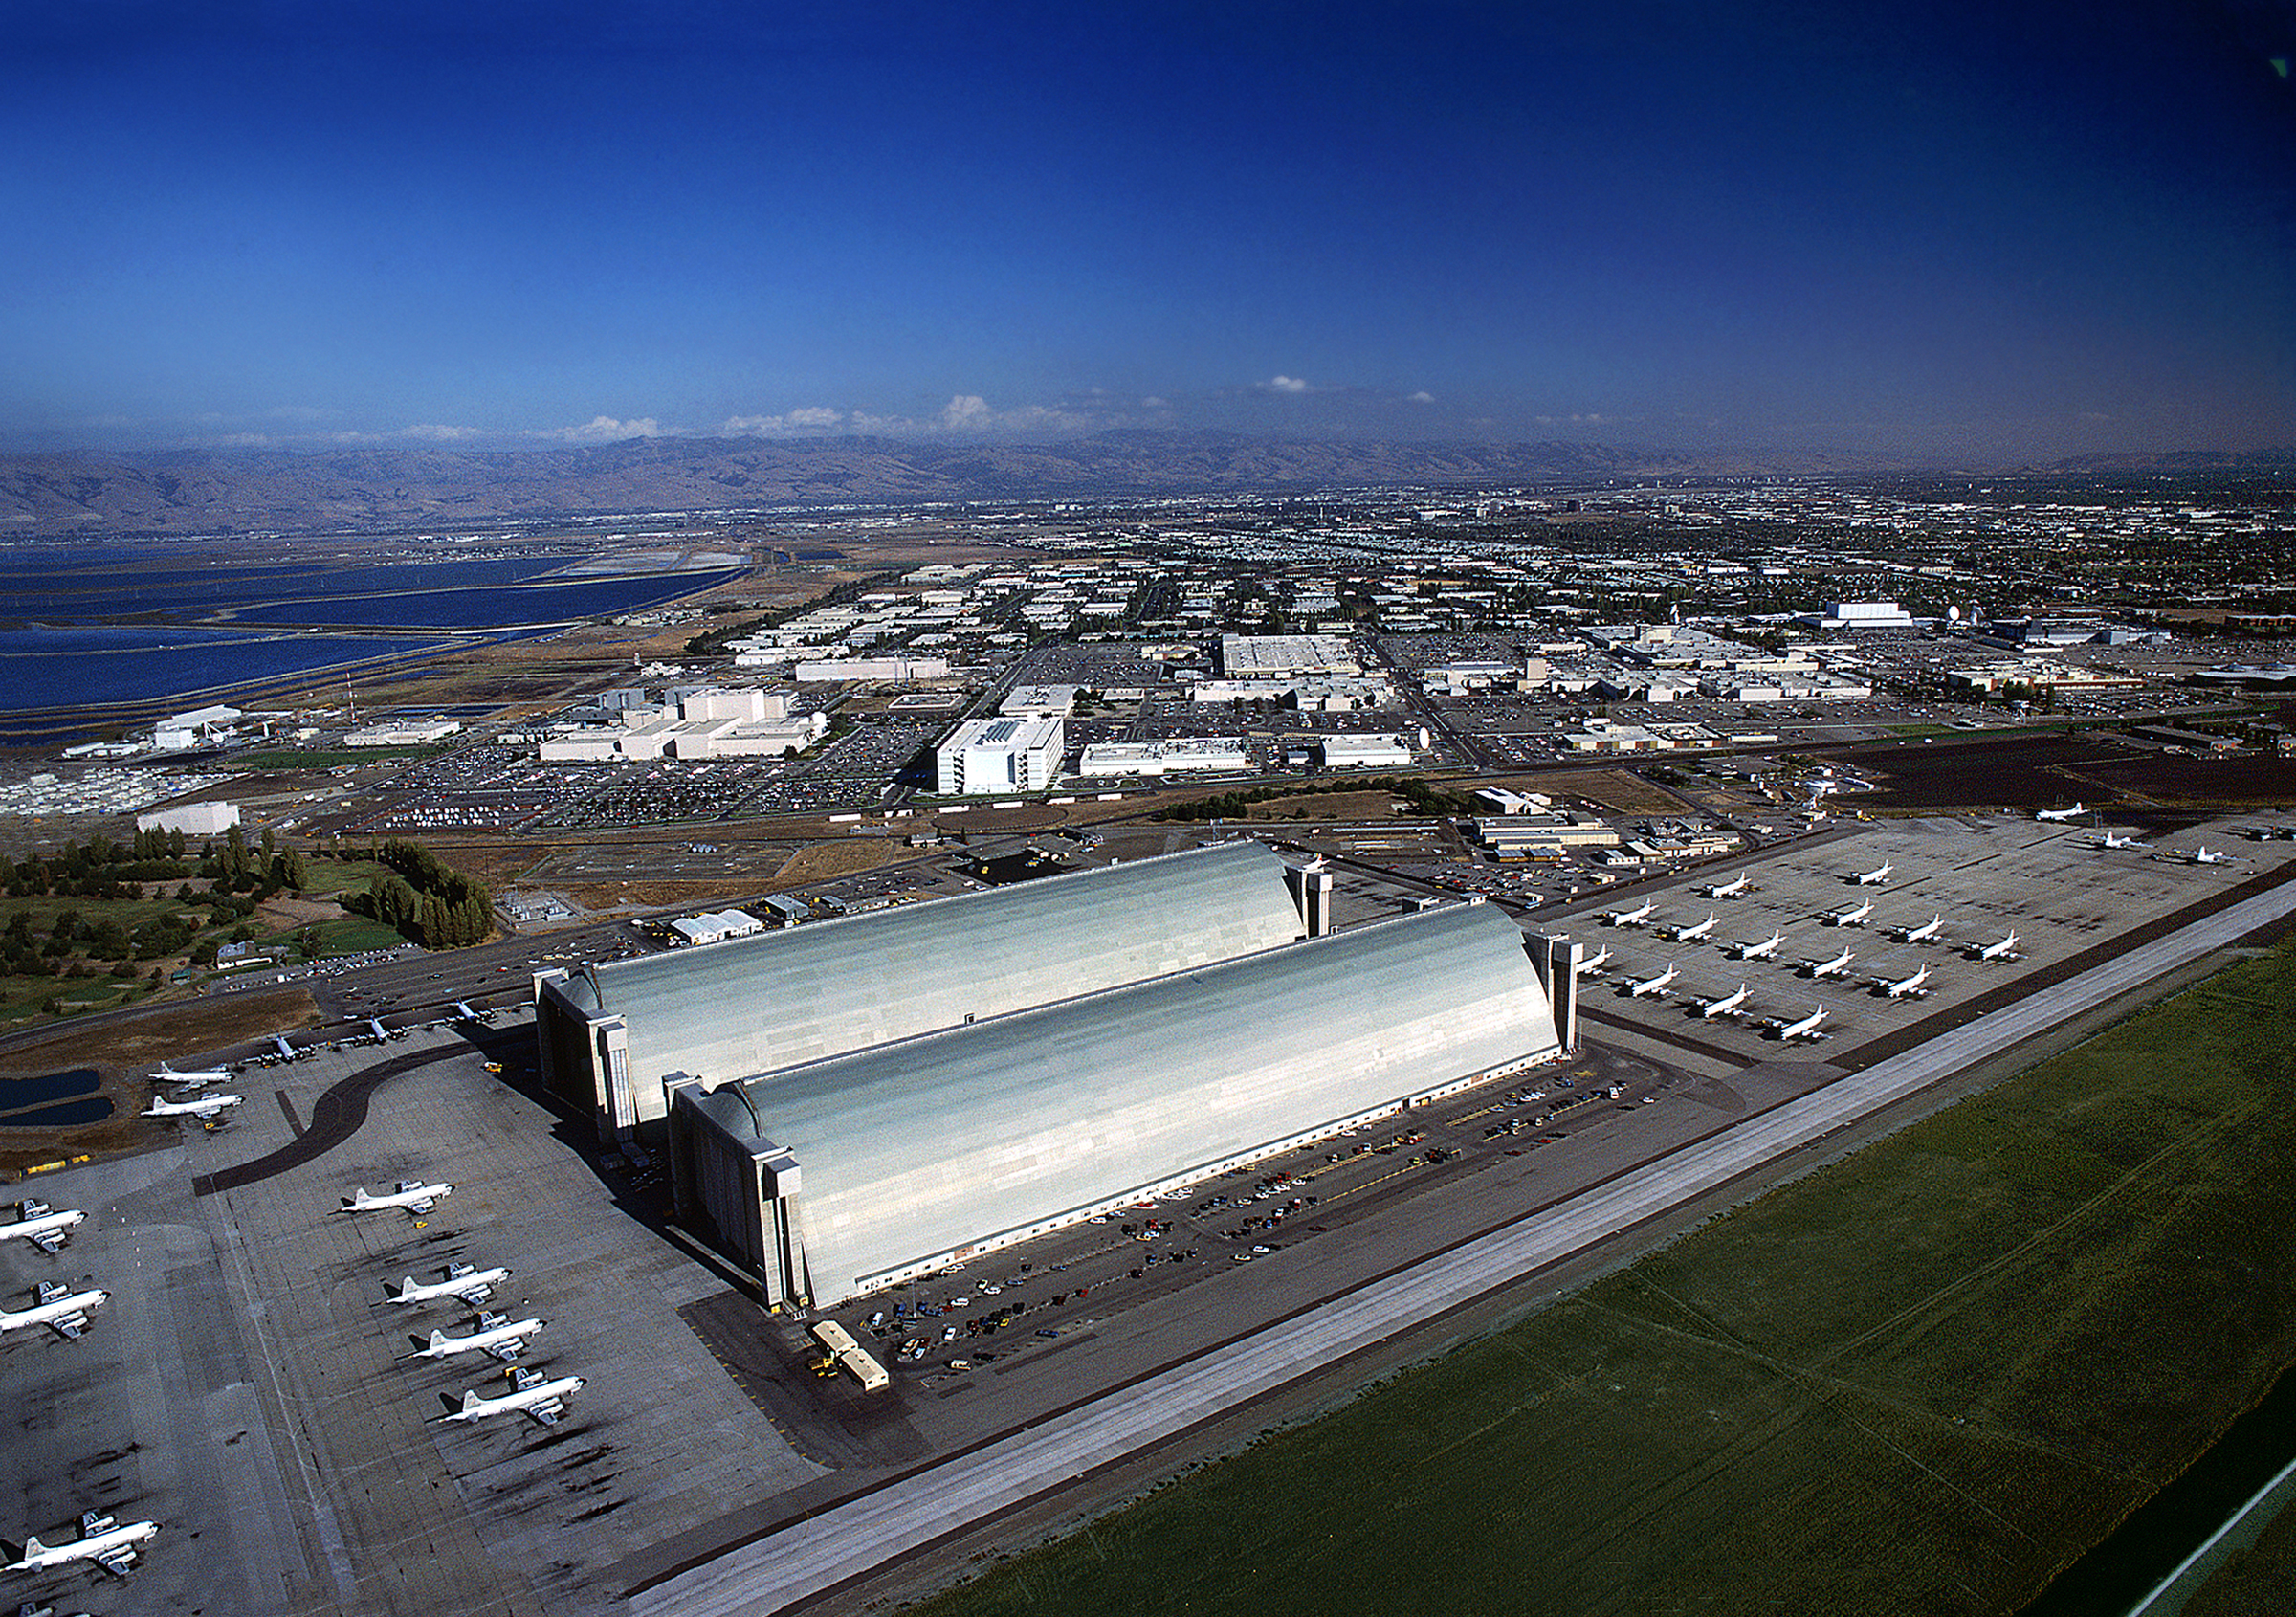 A birds-eye view of Hangars 2 and 3 located side-by-side at Moffett Field. Rows of P-3 Orion patrol planes are parked outside both ends of the hangars.